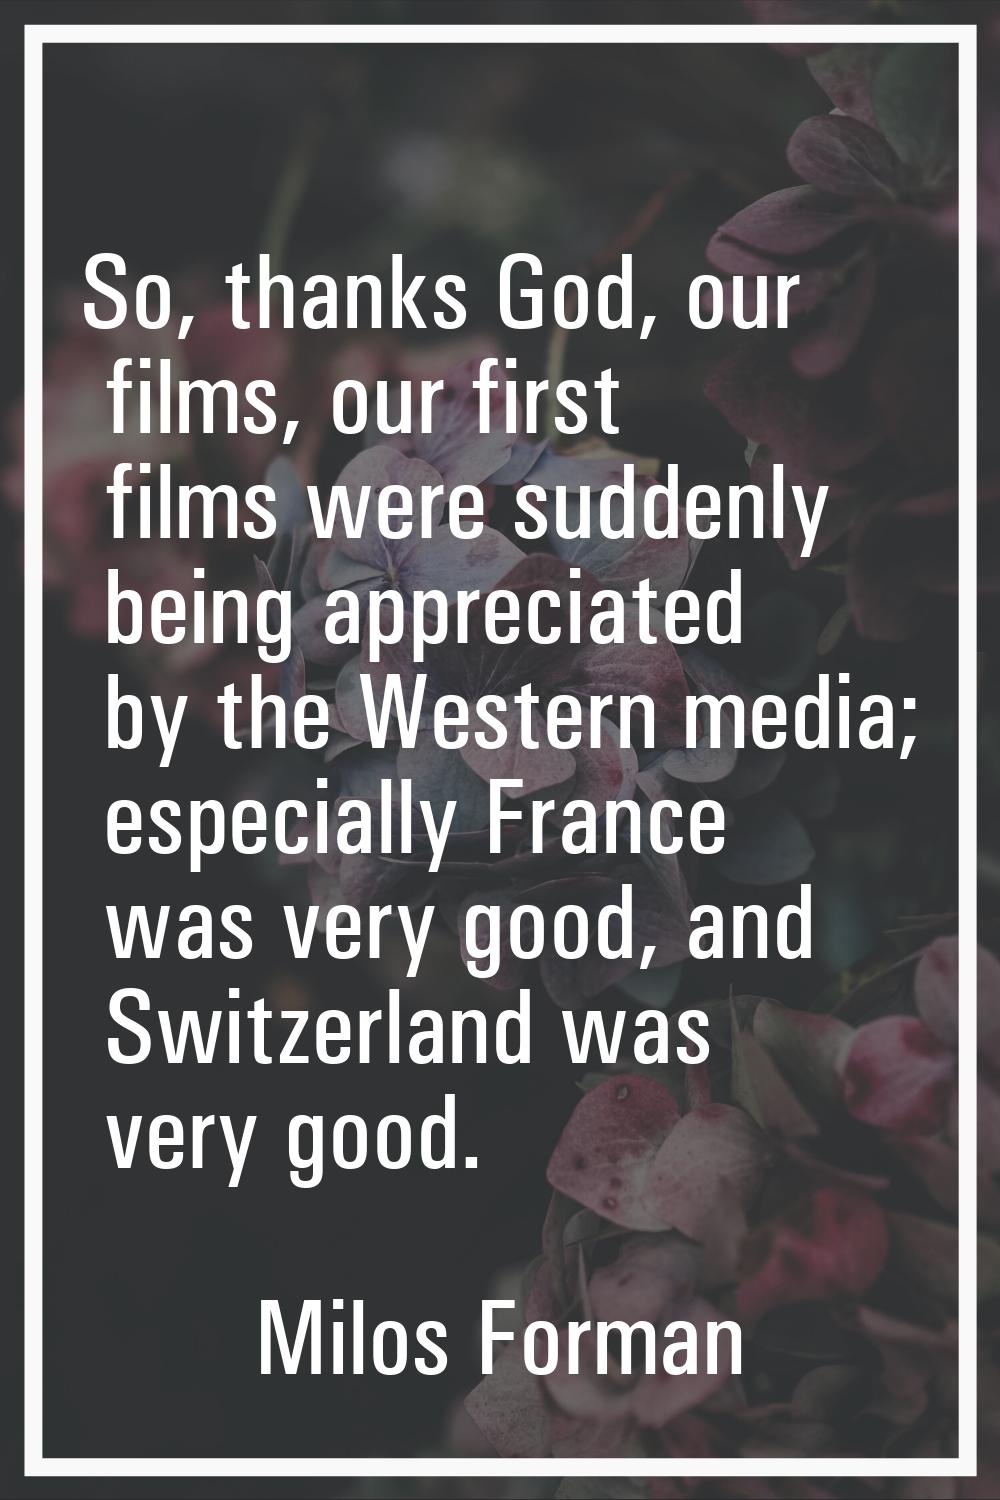 So, thanks God, our films, our first films were suddenly being appreciated by the Western media; es